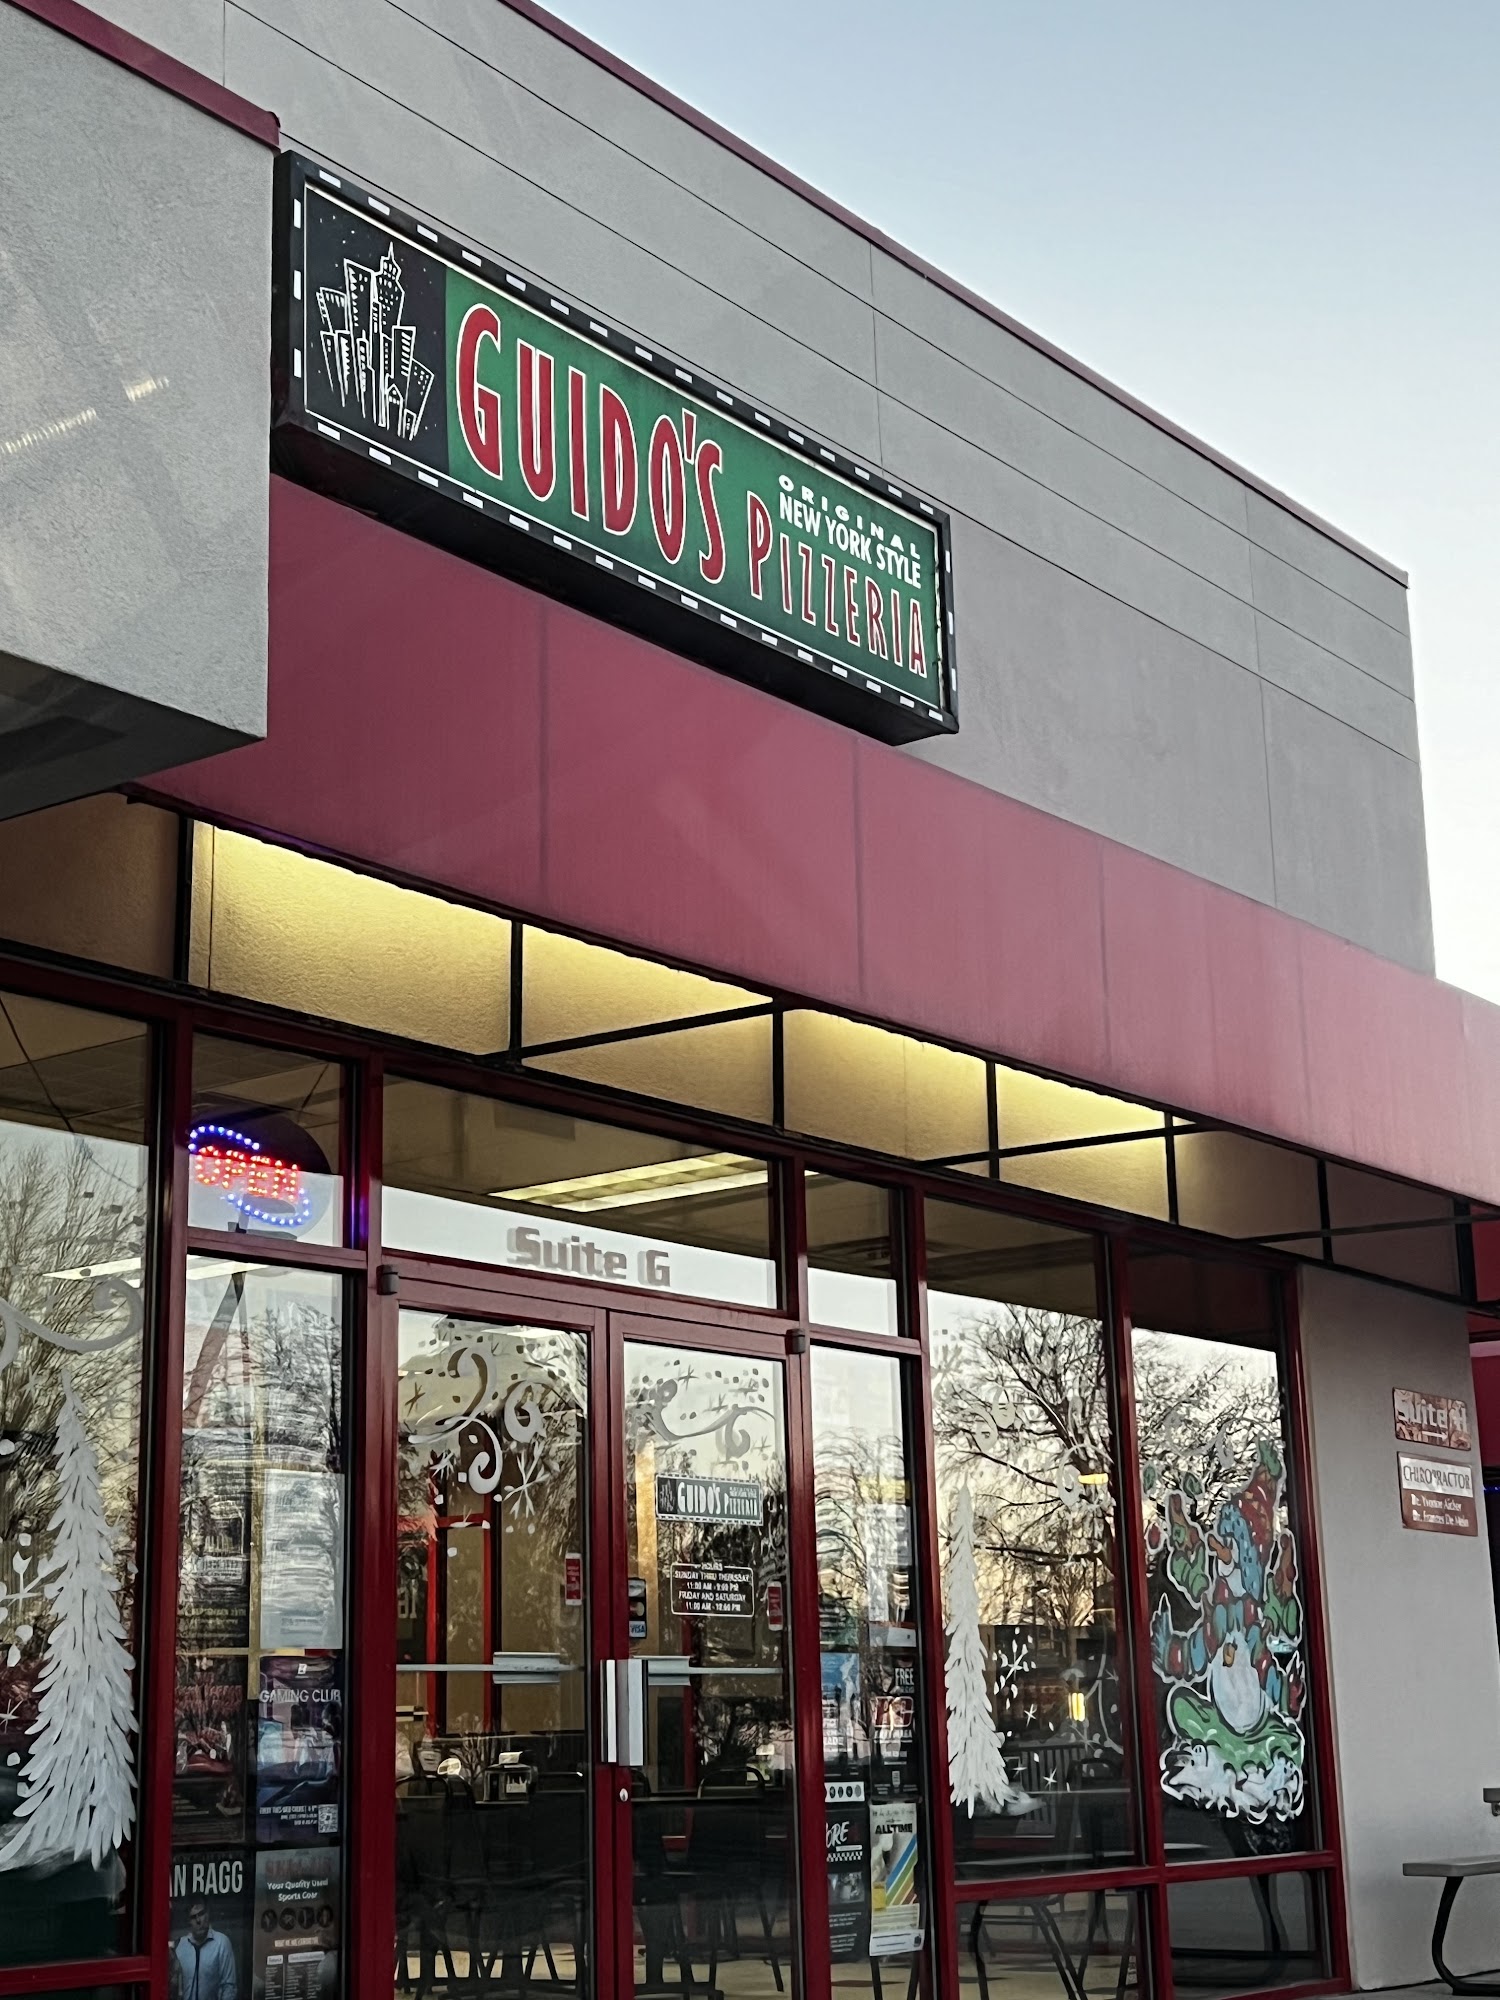 Guido's Original New York Style Pizza Chinden